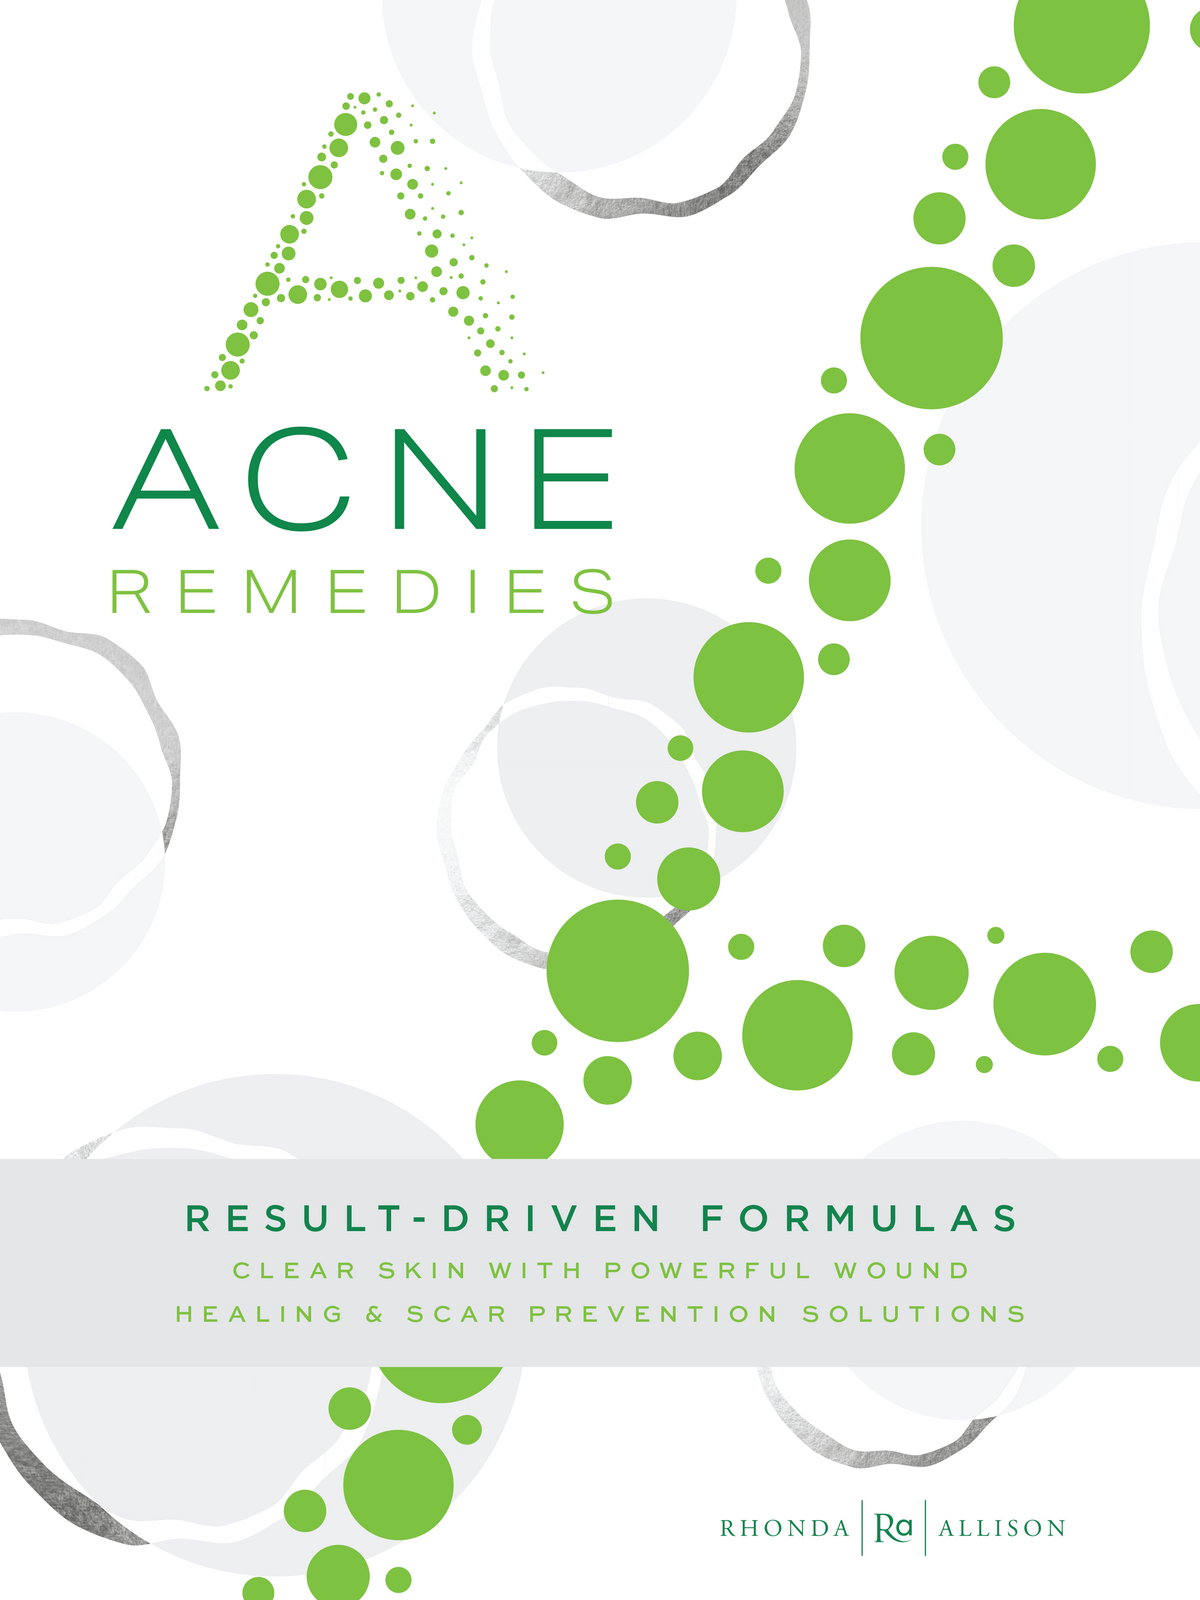 Acne Remedies Counter Card – Result-Driven Formulas